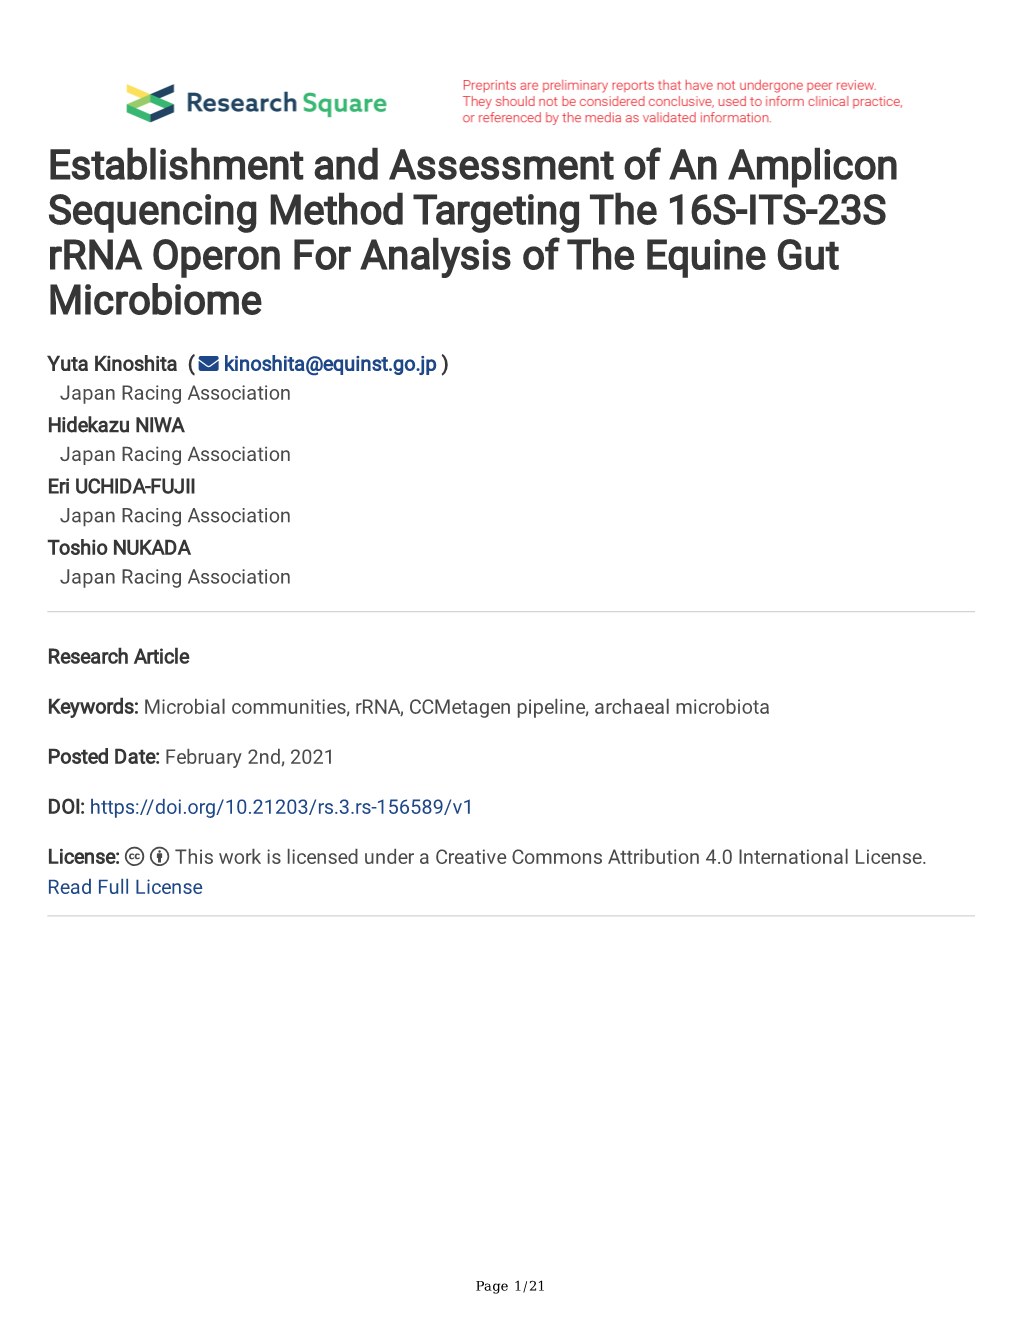 Establishment and Assessment of an Amplicon Sequencing Method Targeting the 16S-ITS-23S Rrna Operon for Analysis of the Equine Gut Microbiome